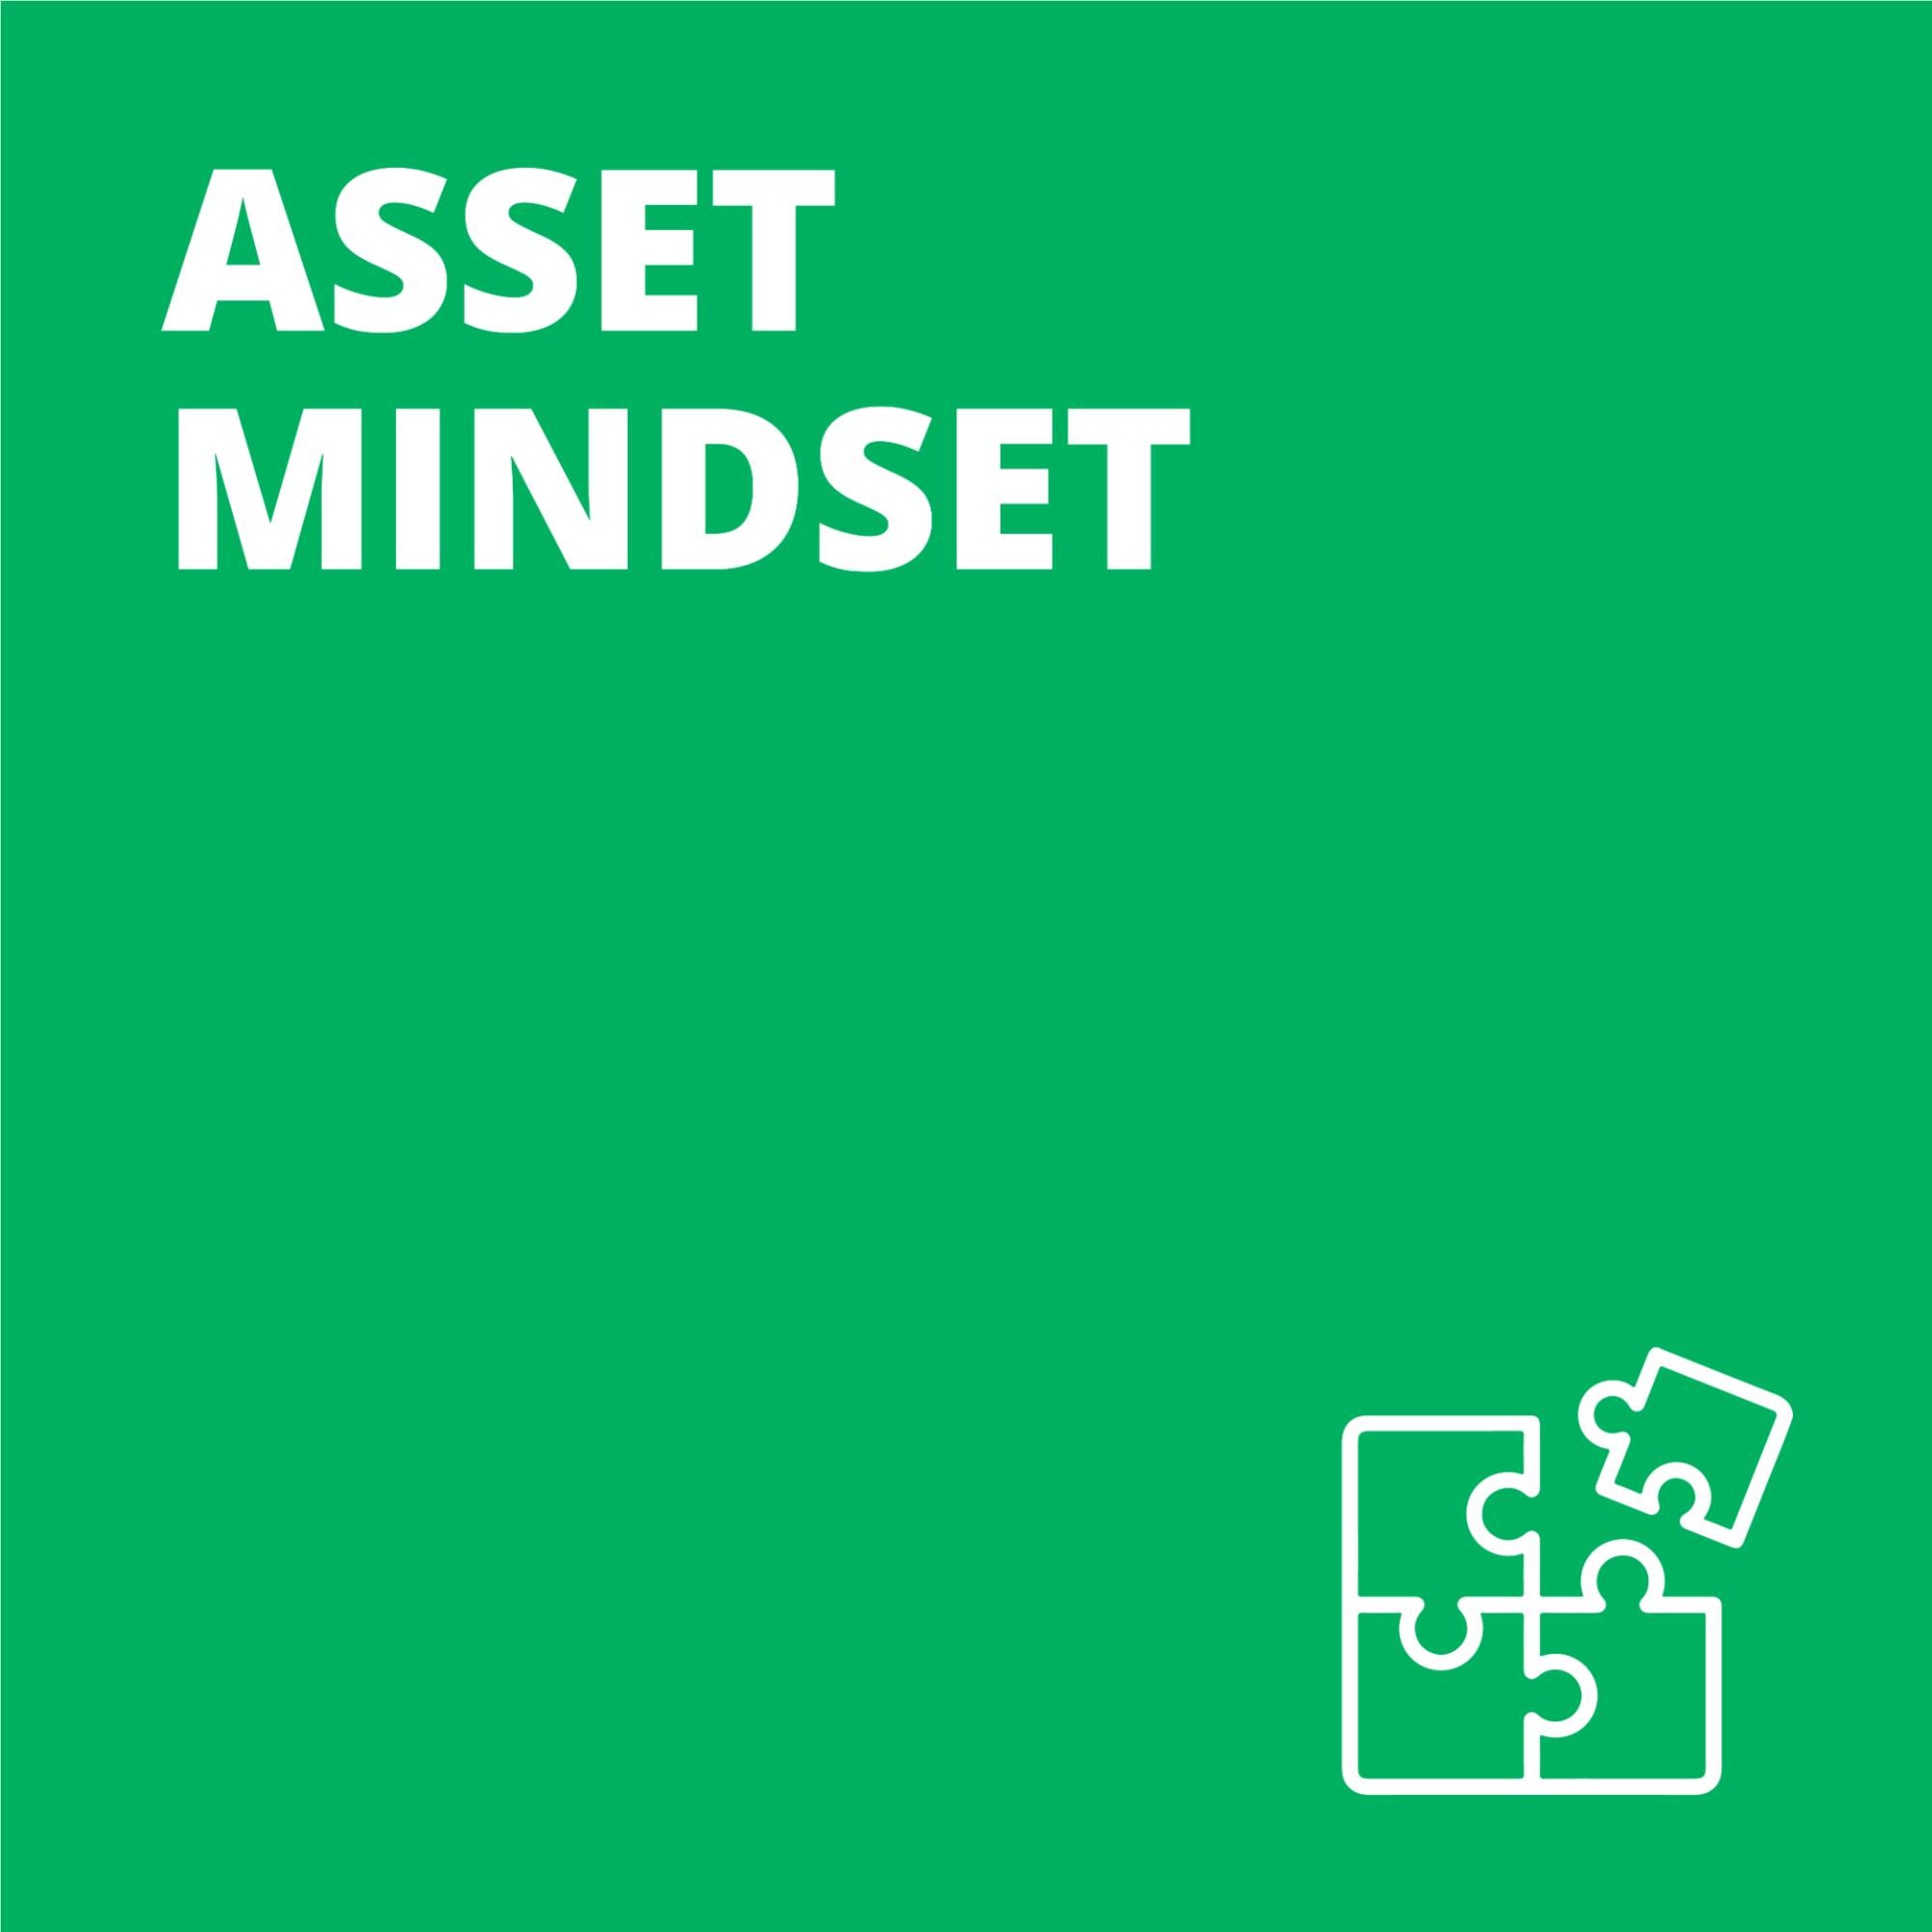 "Asset Mindset" text with puzzle pieces icon